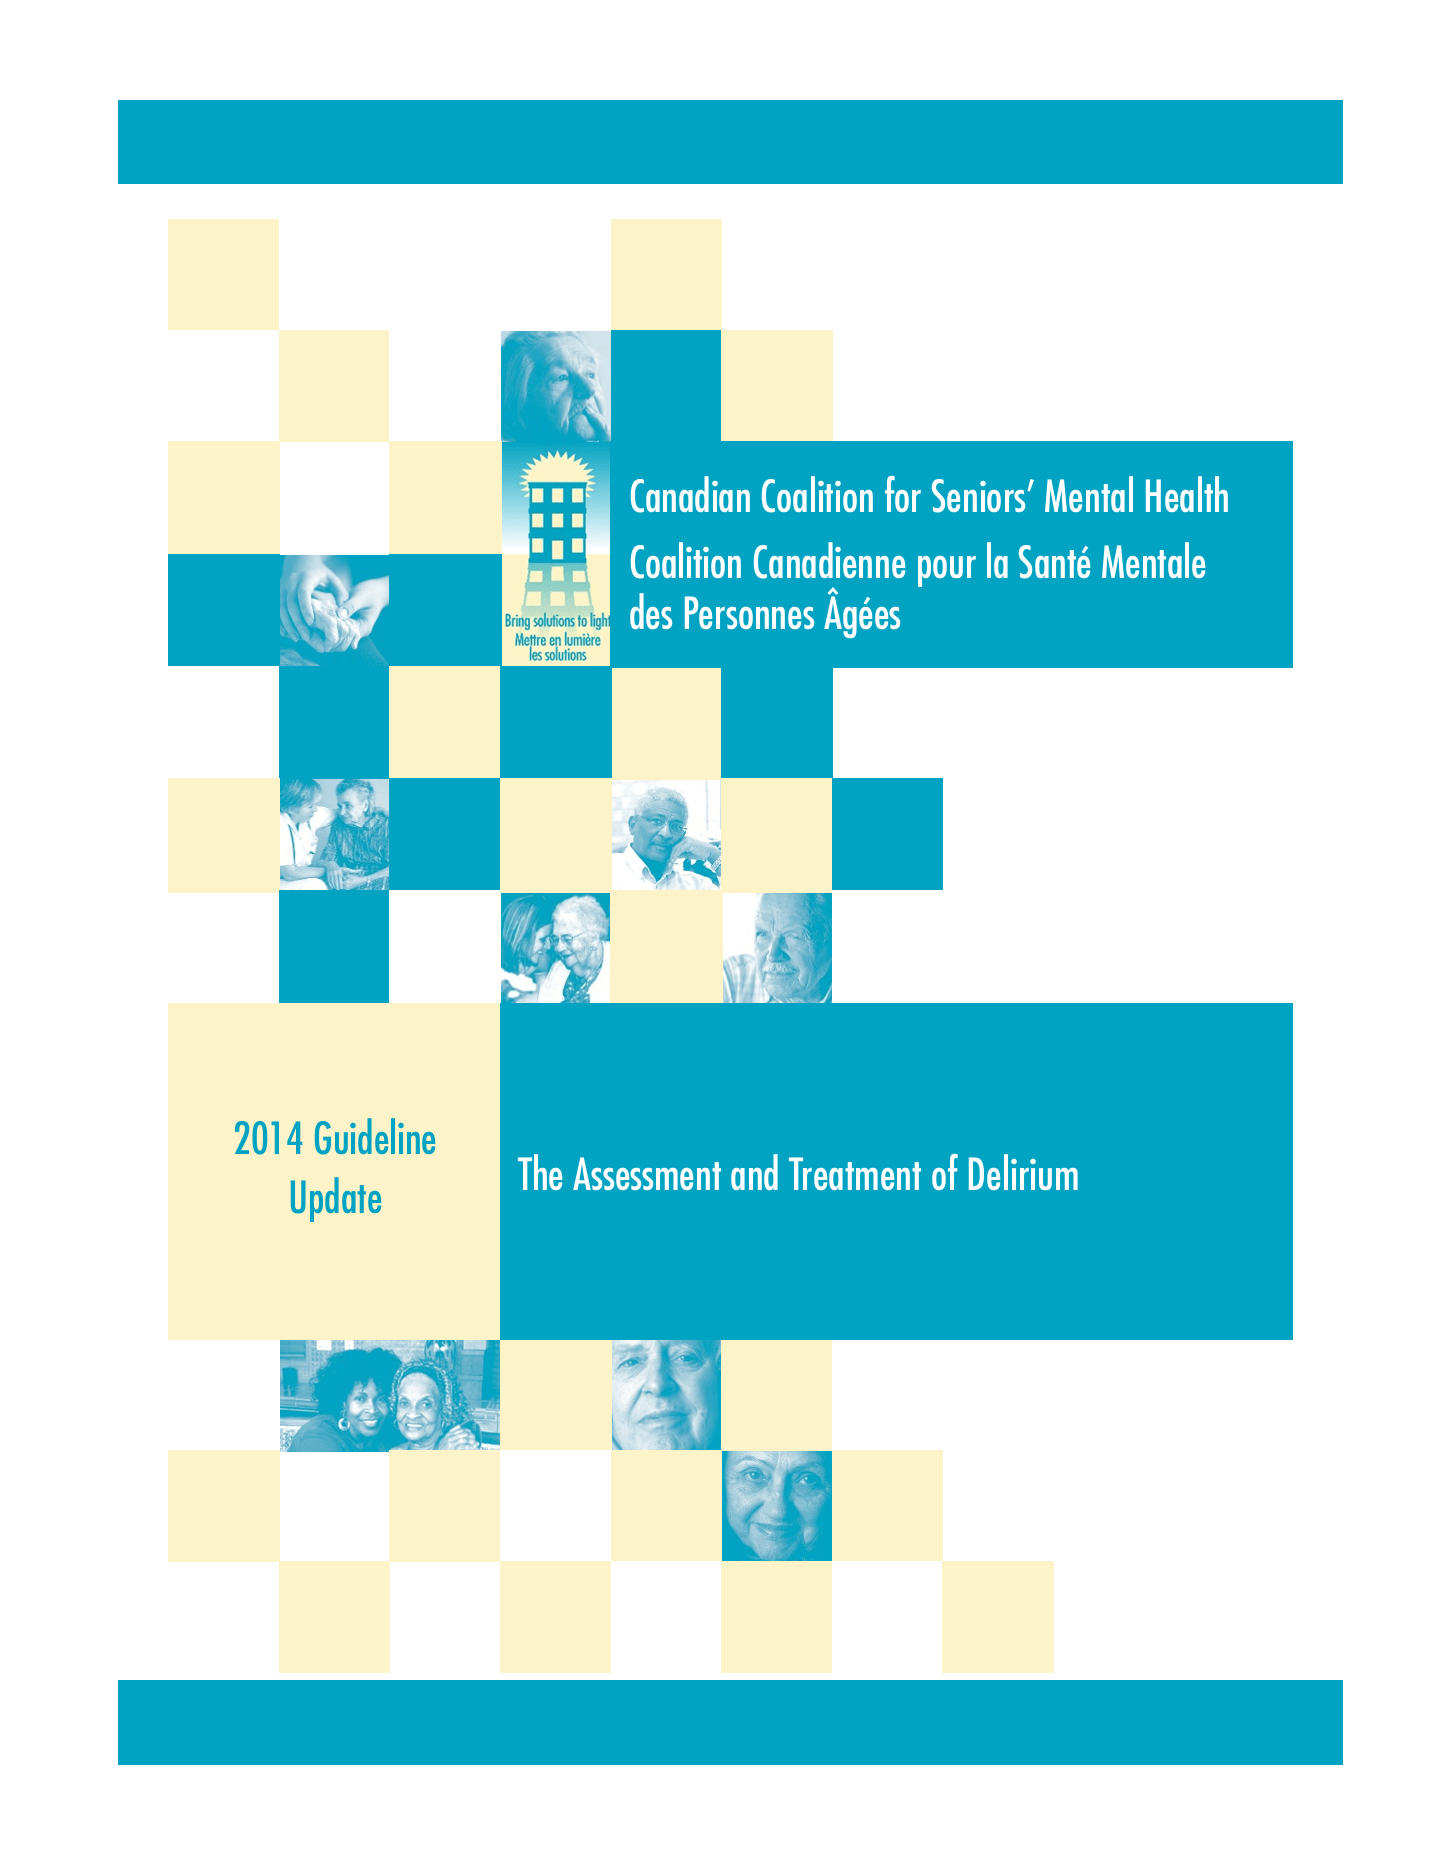 A cover for the Delirium Clinical Guidelines that features photos of older adults with cyan blue checkerboard pattern